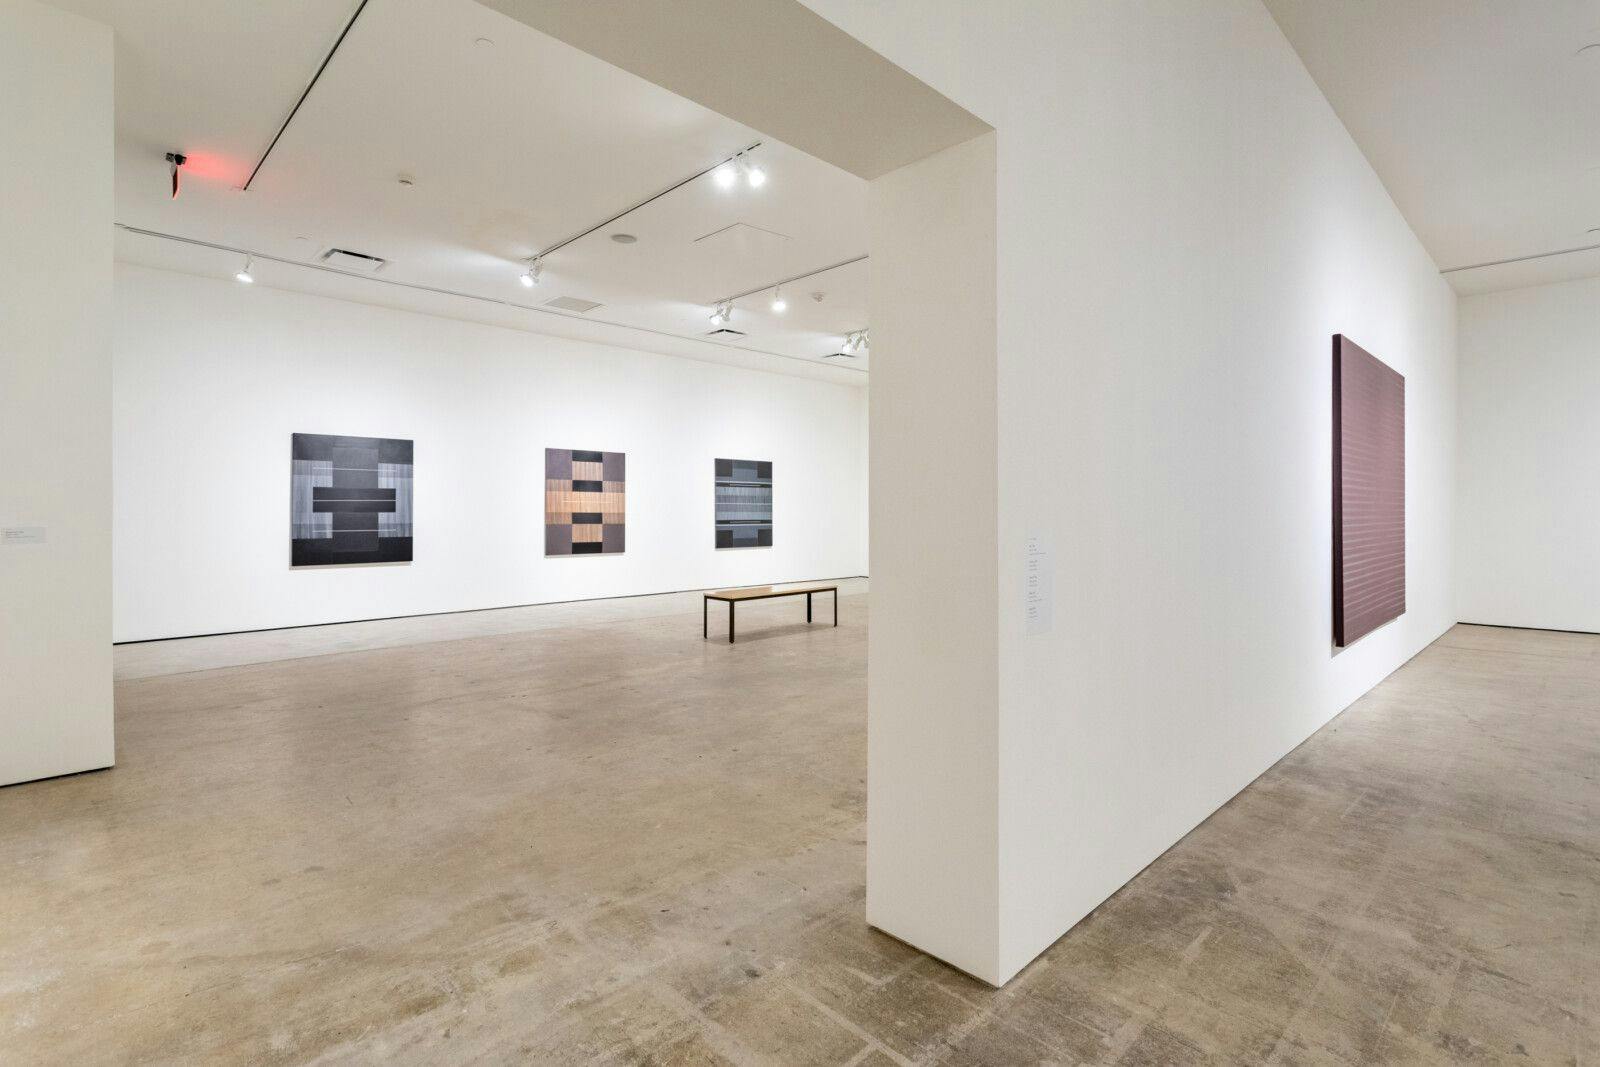 Max Cole: Endless Journey installed at SITE Santa Fe, photographed by Shayla Blatchford